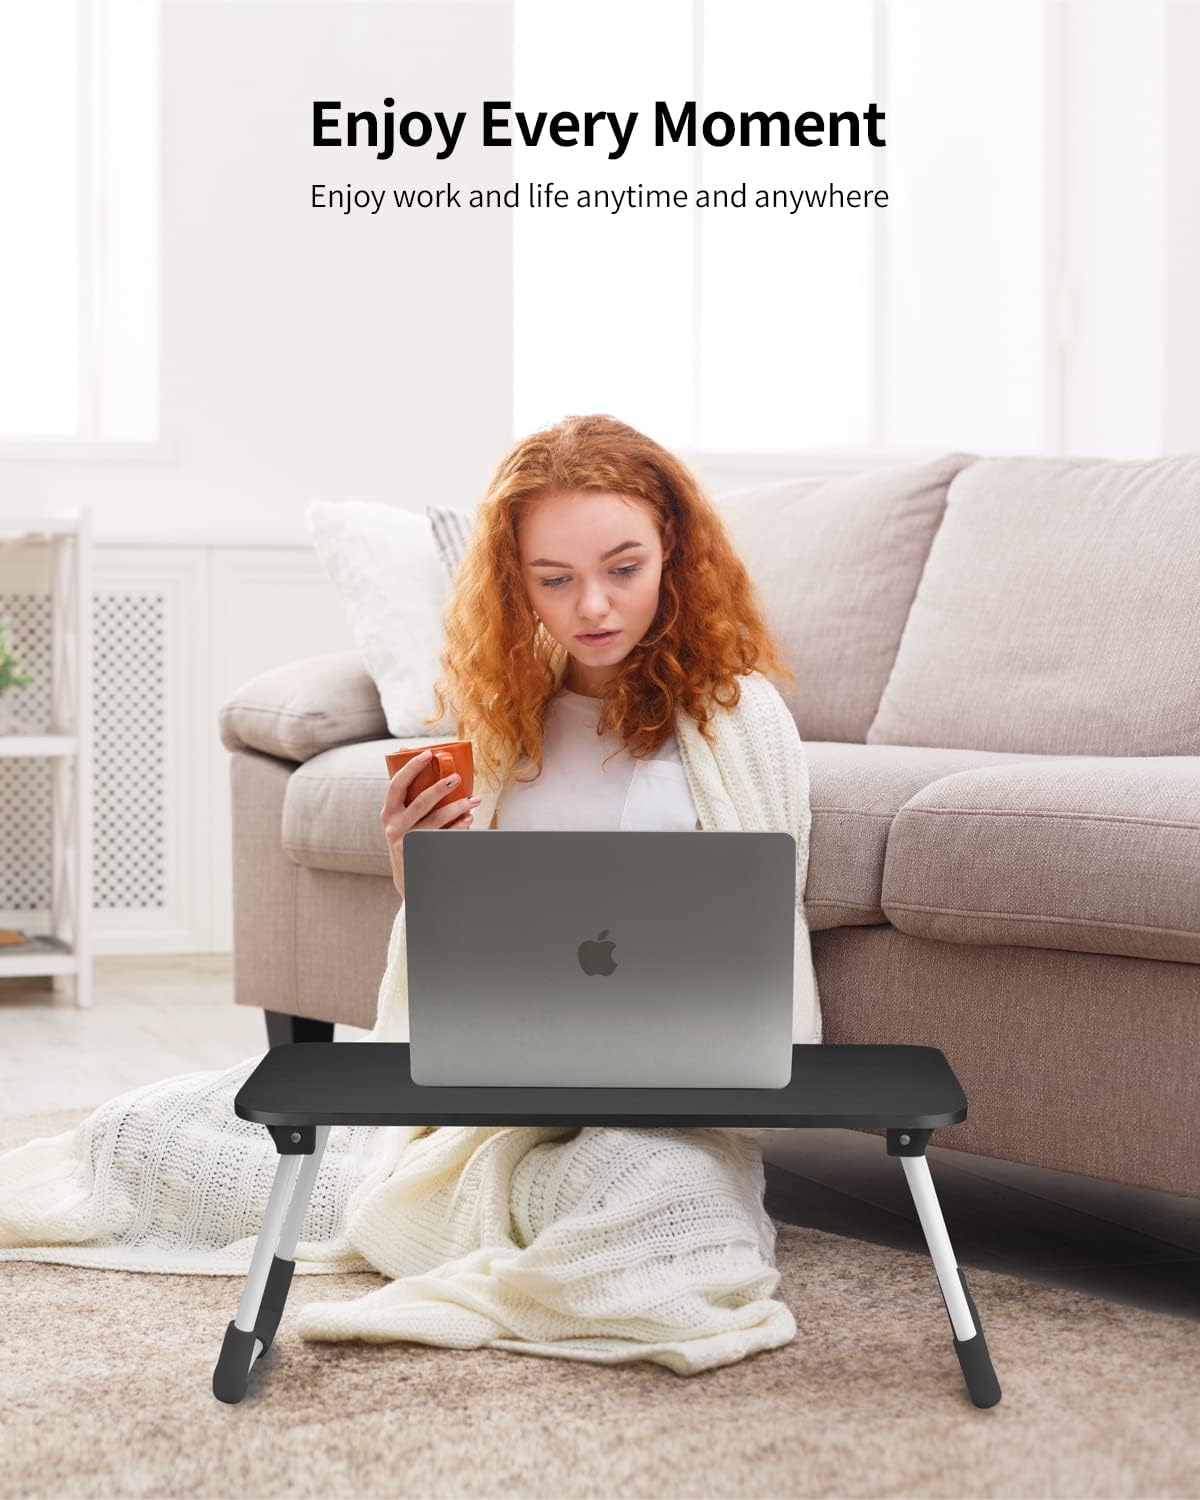 Portable Foldable Laptop Stand Desk for Bed & Sofa (Some Packagings Might Be Damaged)